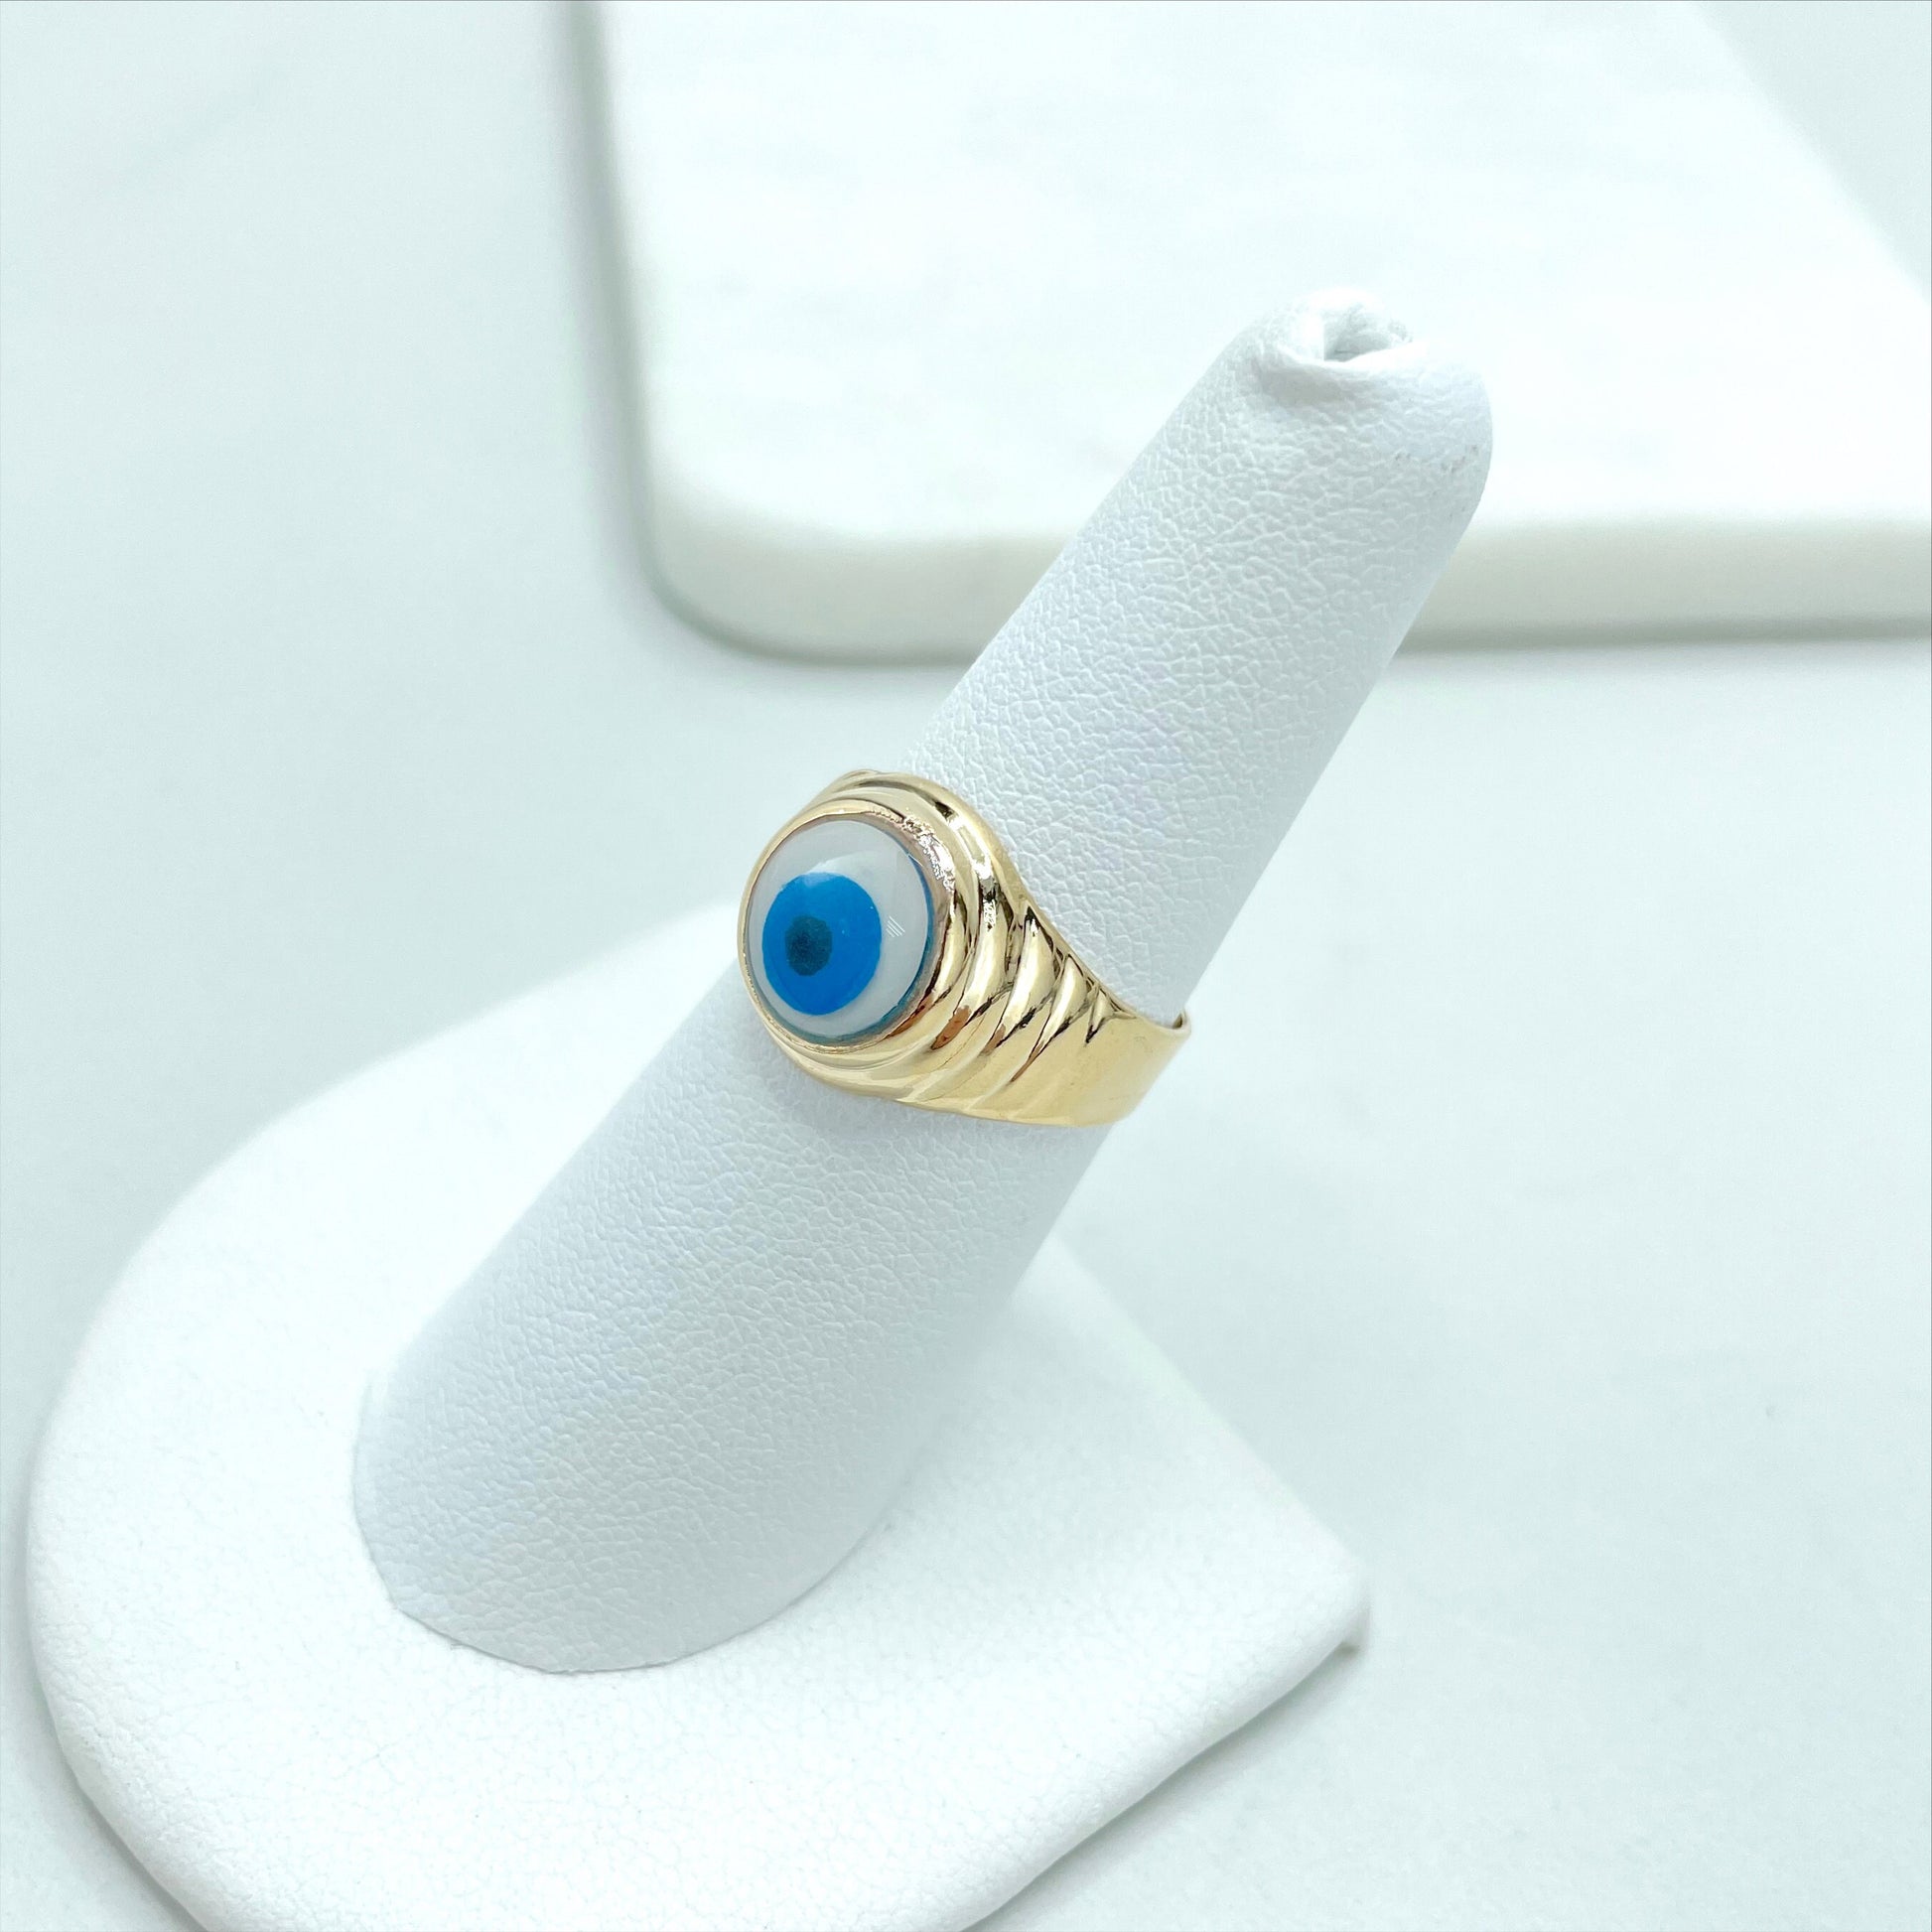 18k Gold Filled Texturized Blue Evil Eye, Greek Eyes Ring, Lucky & Protection Ring, Wholesale Jewelry Making Supplies